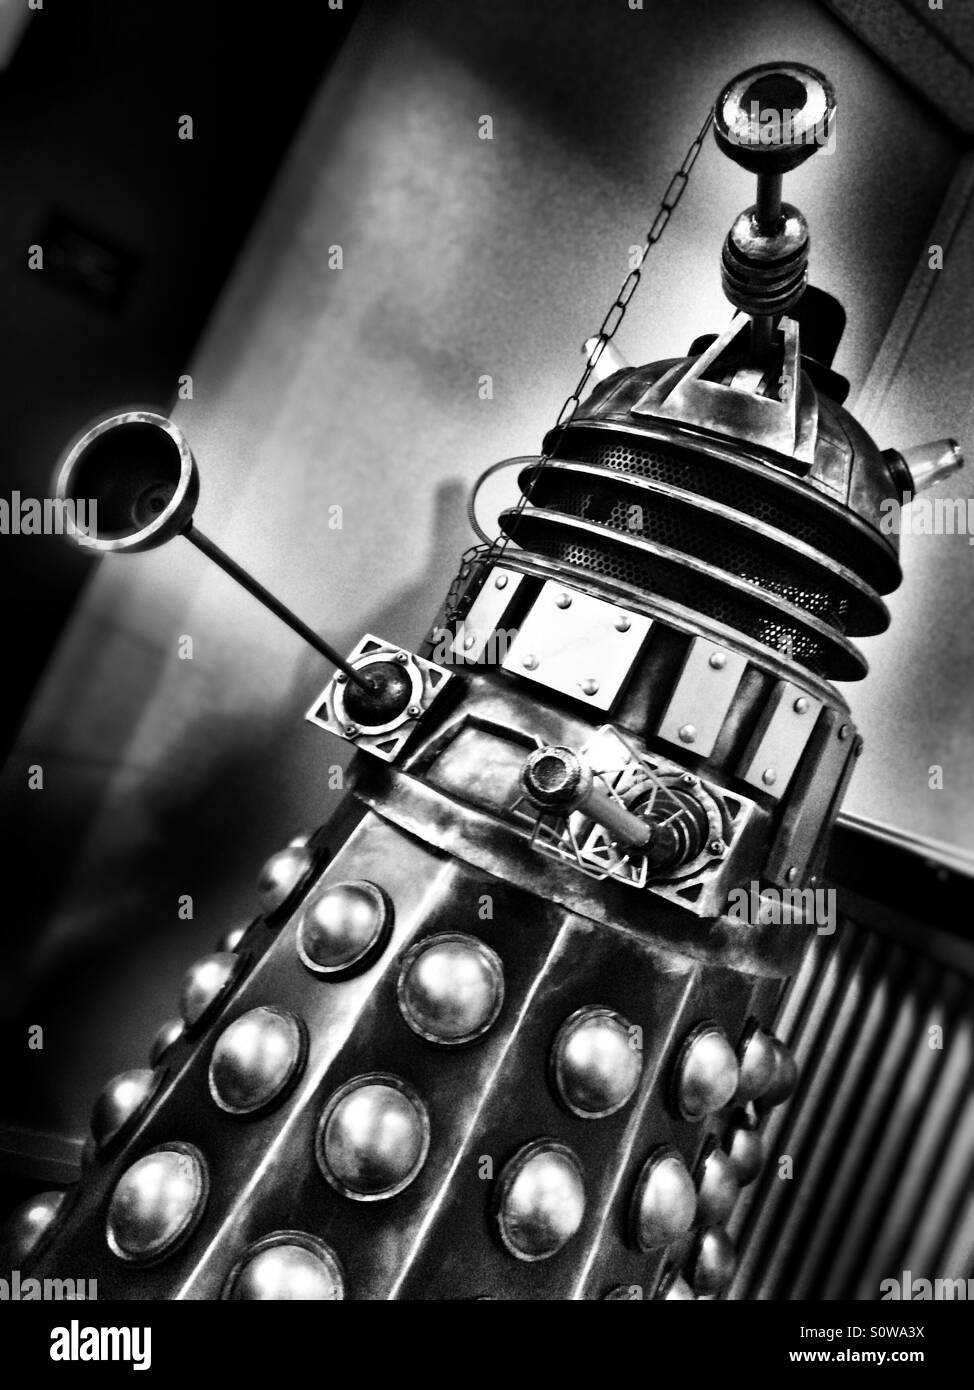 Dalek from BBC Doctor Who TV Show Stock Photo